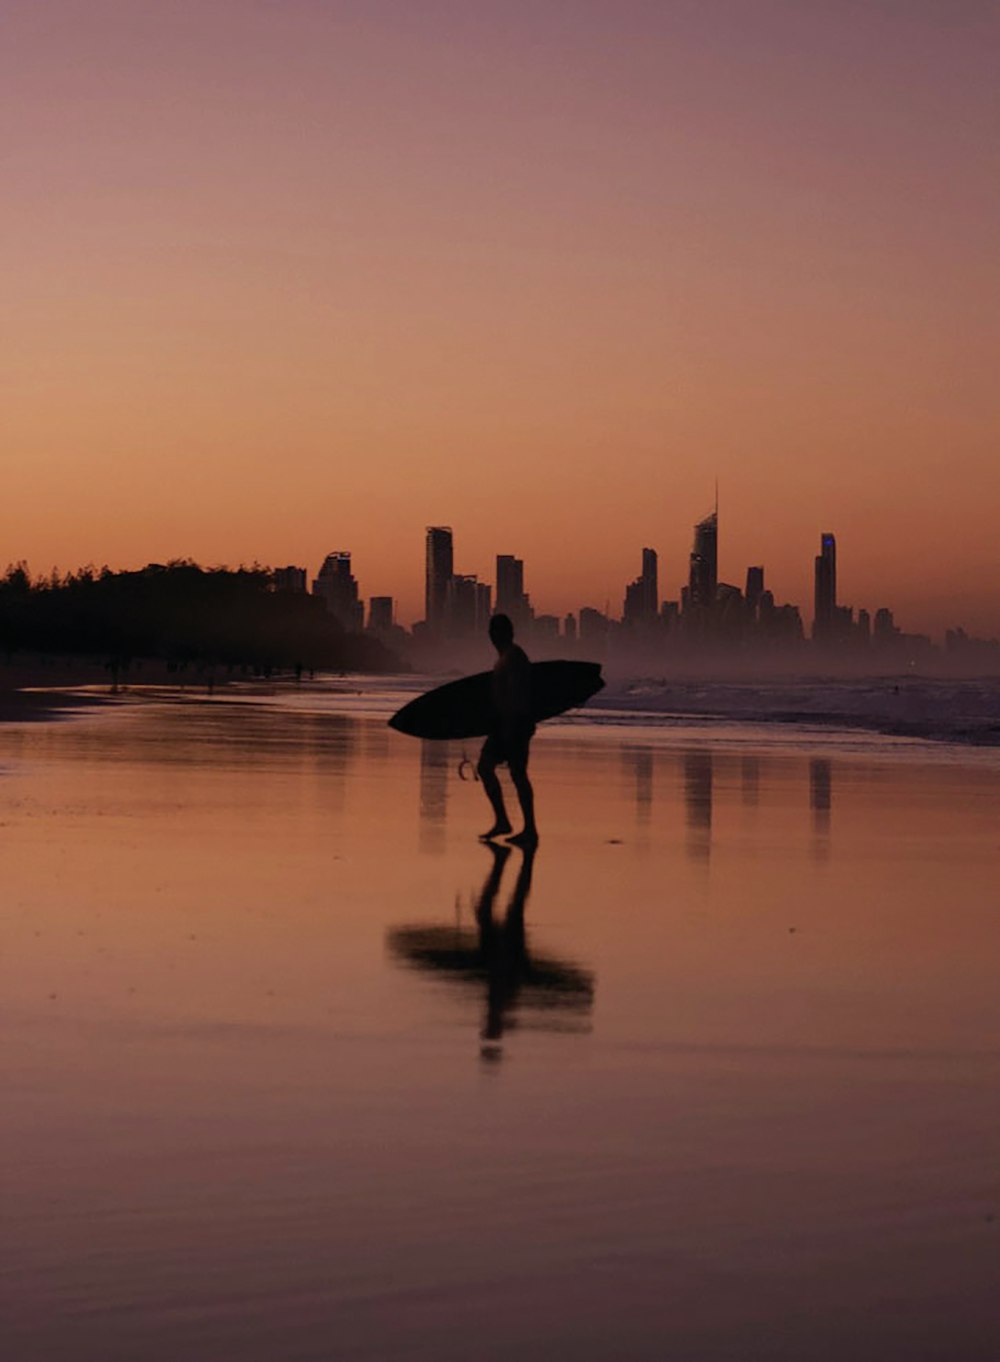 silhouette of person holding surfboard walking on beach during sunset